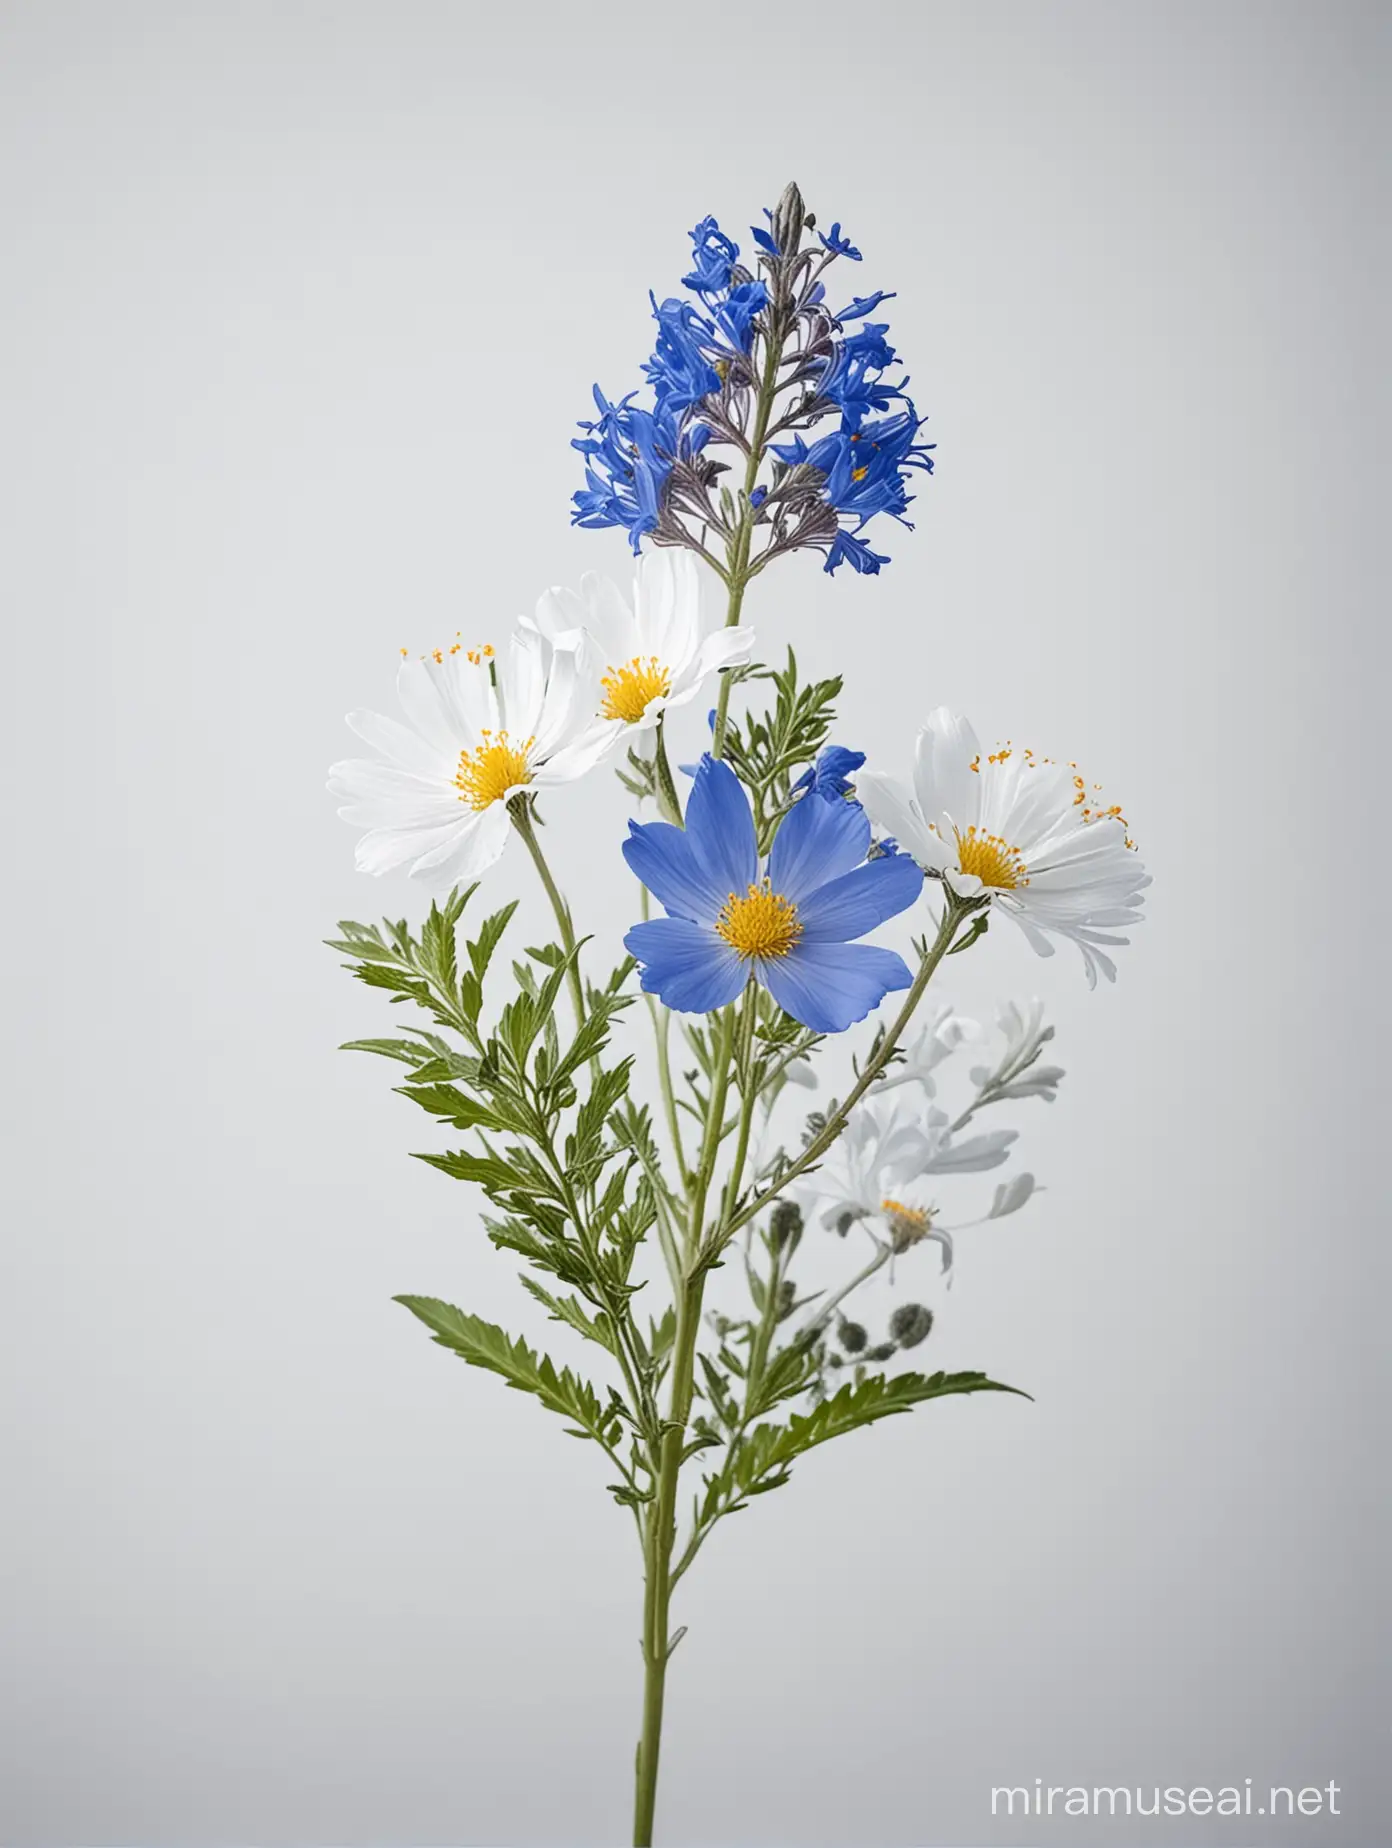 Beautiful Wild Flowers on a Serene Blue and White Background